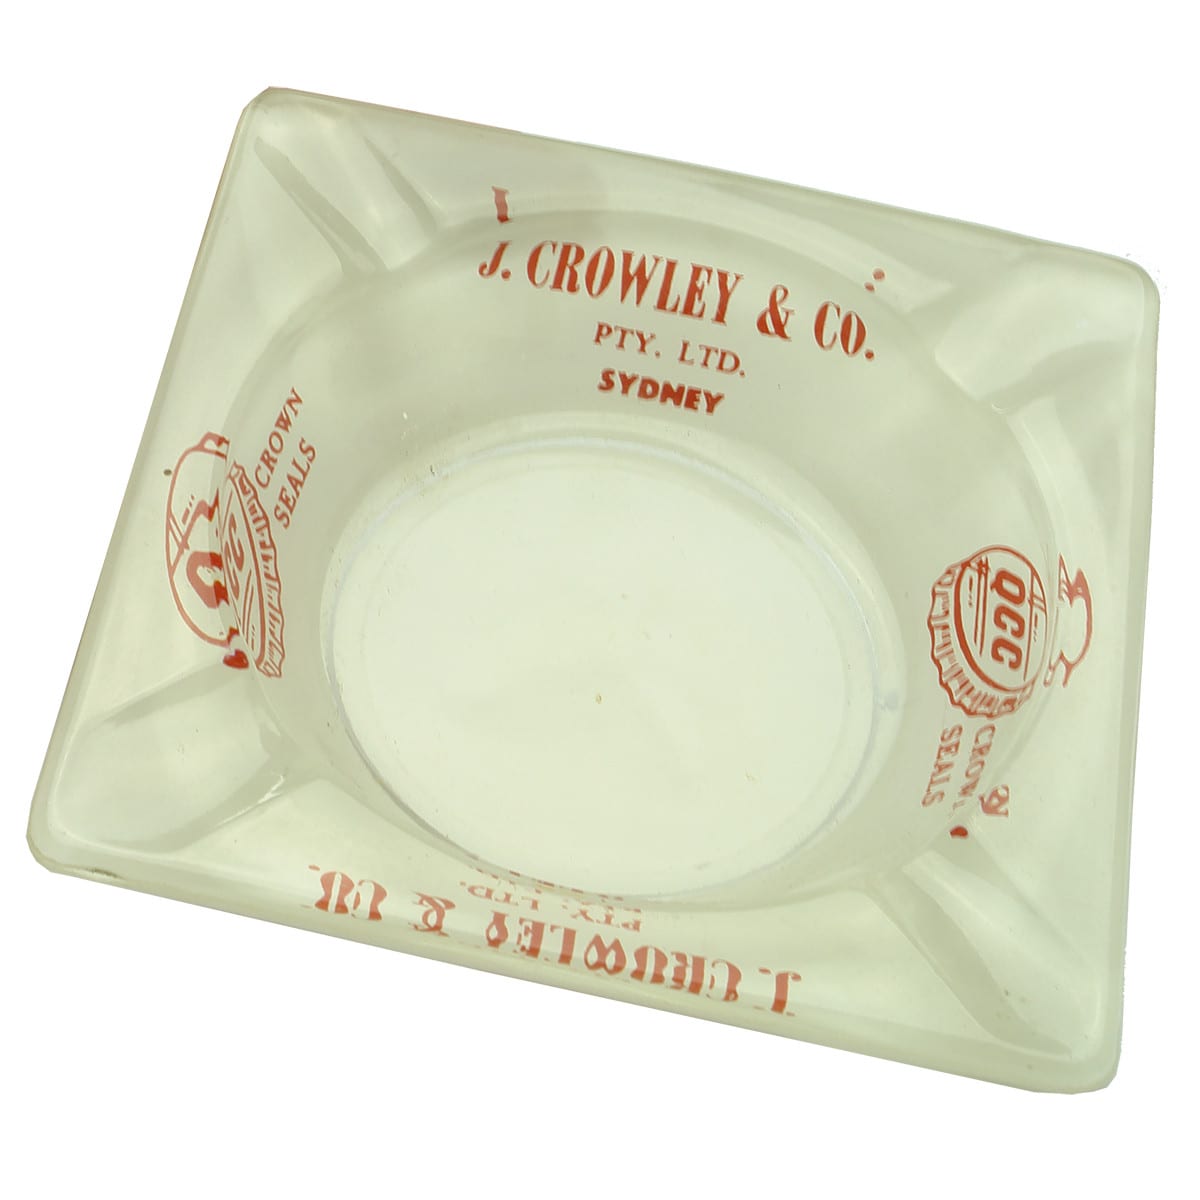 Advertising Ashtray. J. Crowley & Co., Sydney. QCC Crown Seals. (New South Wales)